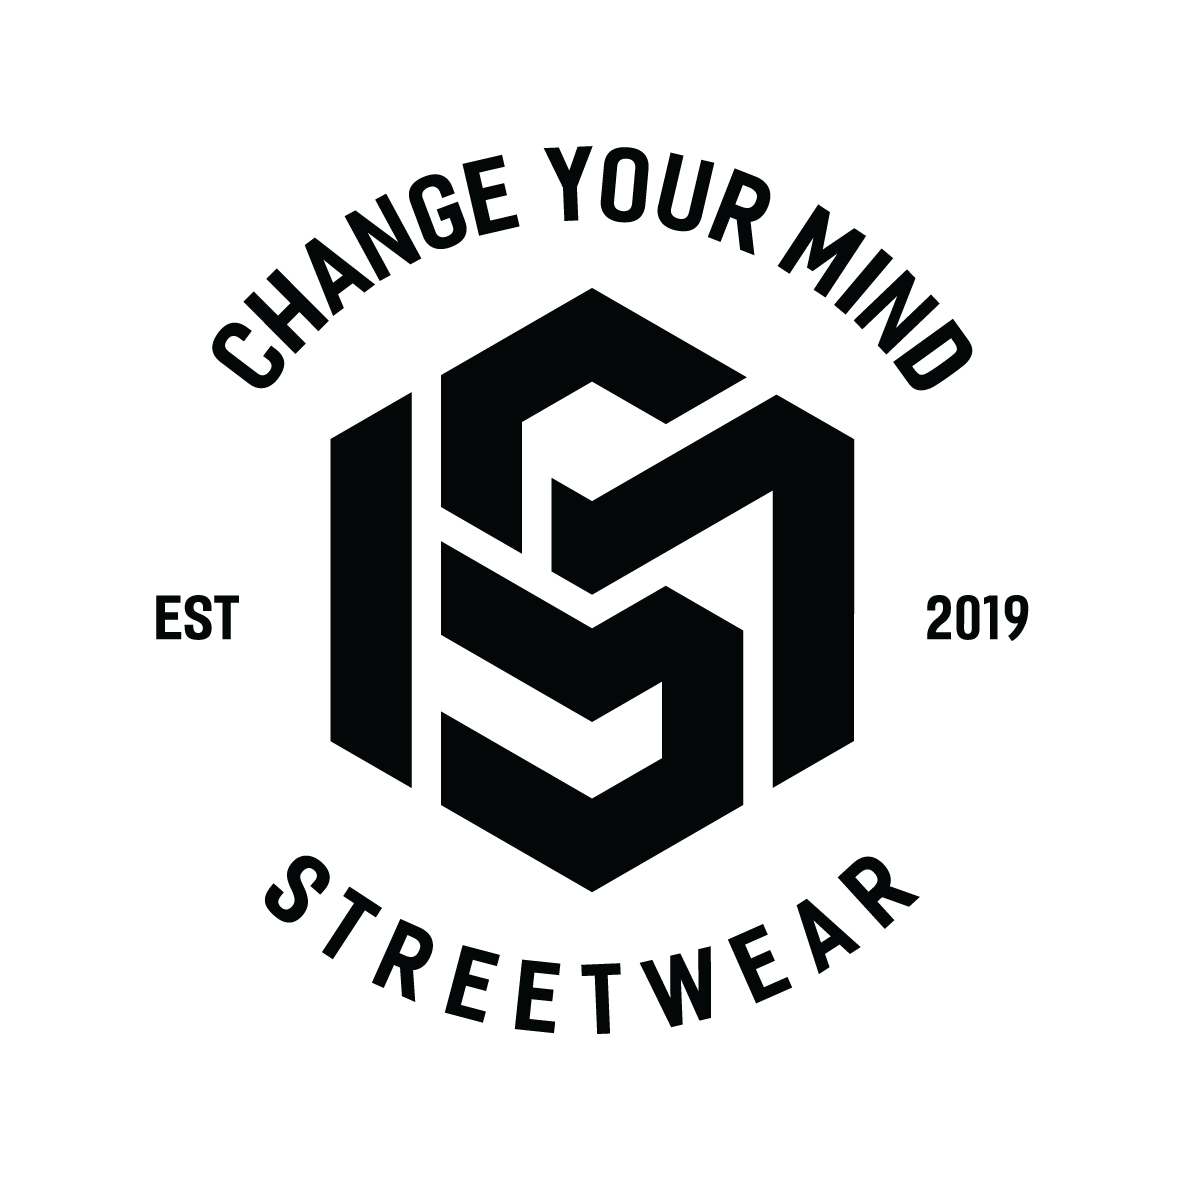 About Change Your Mind Streetwear